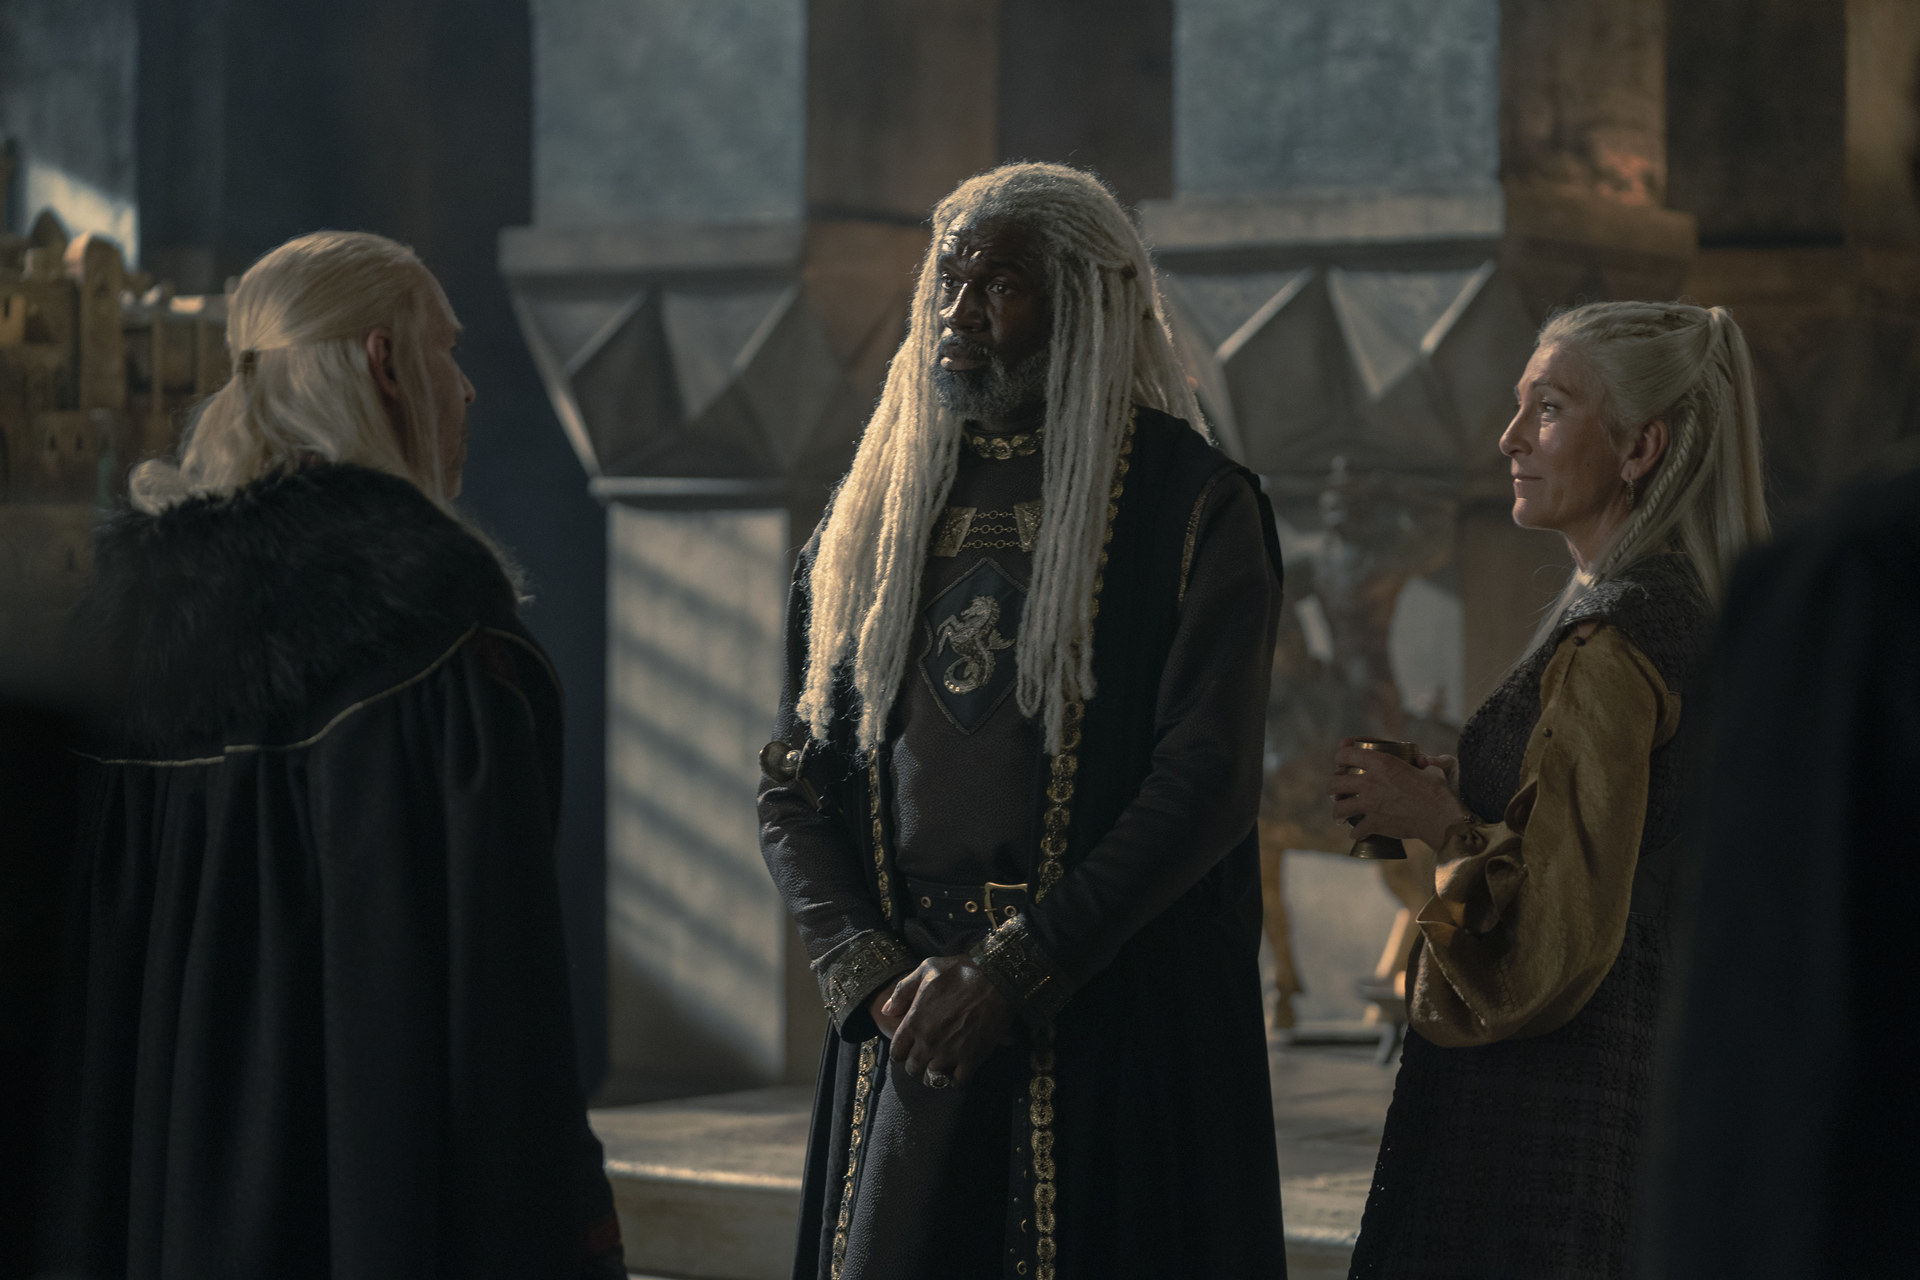 Viserys, Corlys and Rhaenys stand in the Hall of Nine